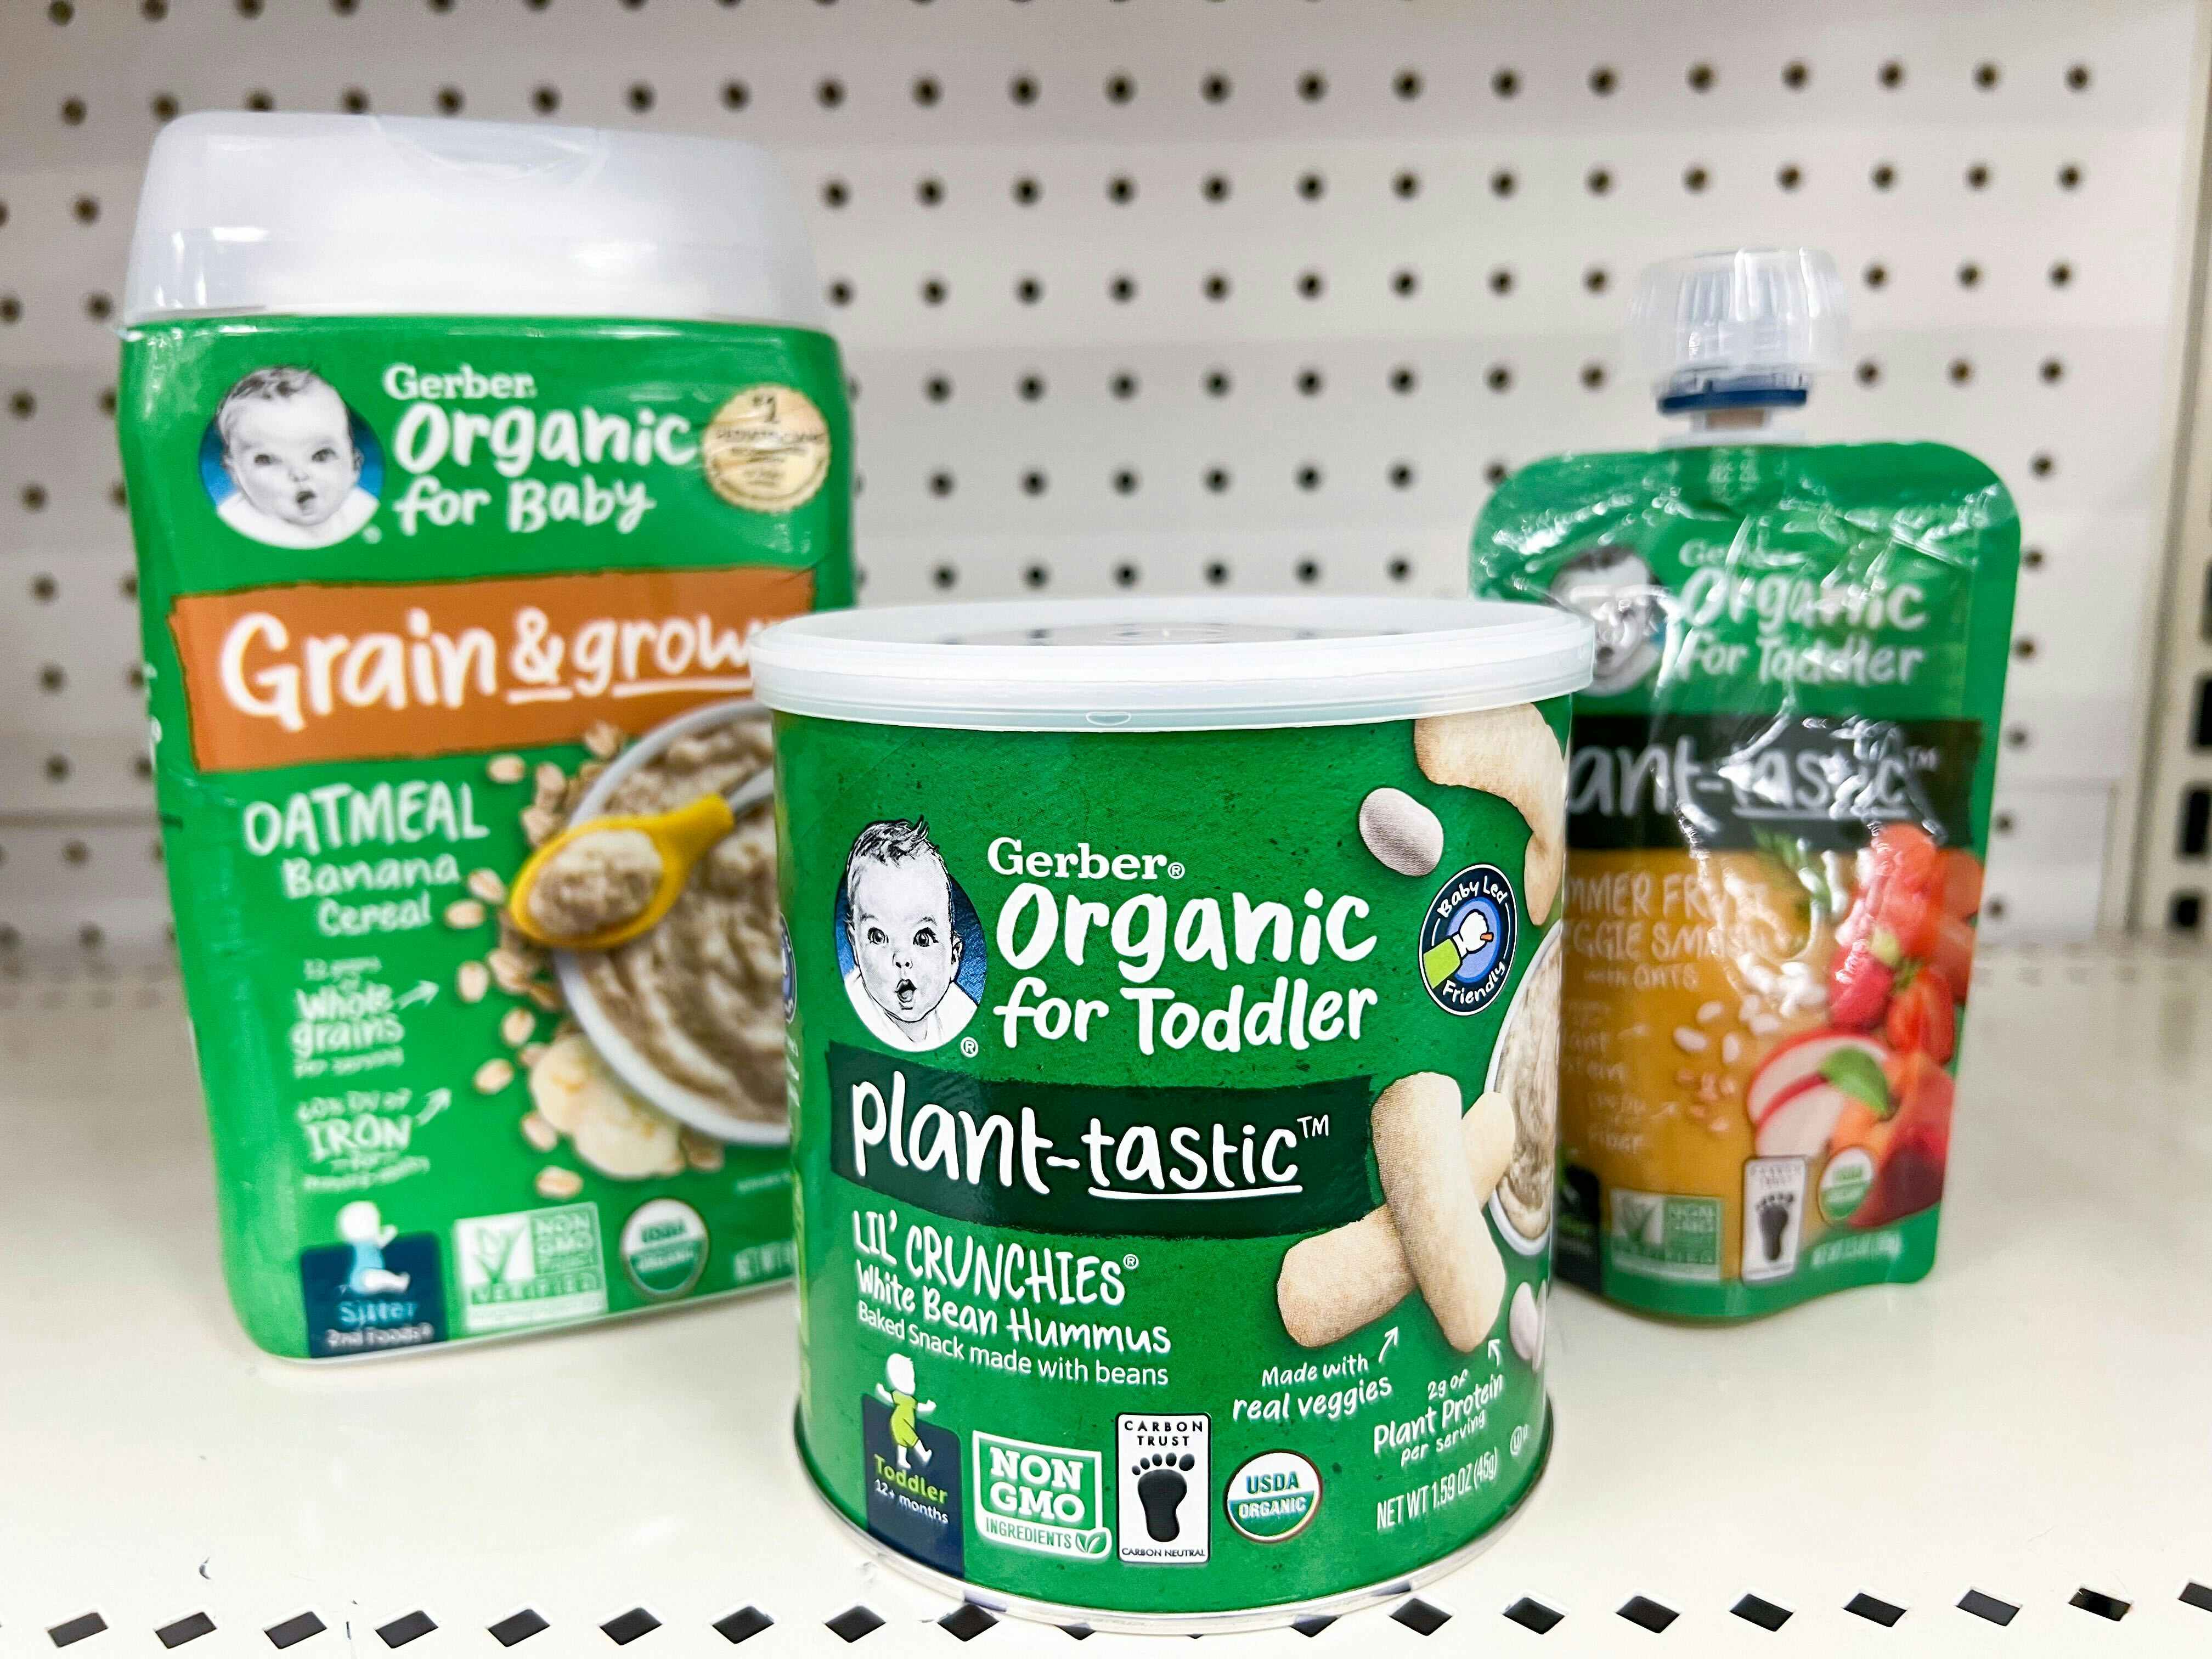 Three Gerber Organic baby products lined up on the shelf: Oatmeal banana cereal, plant-tastic lil' crunchies, and plant-tastic summer fruit and veggie smash with oats